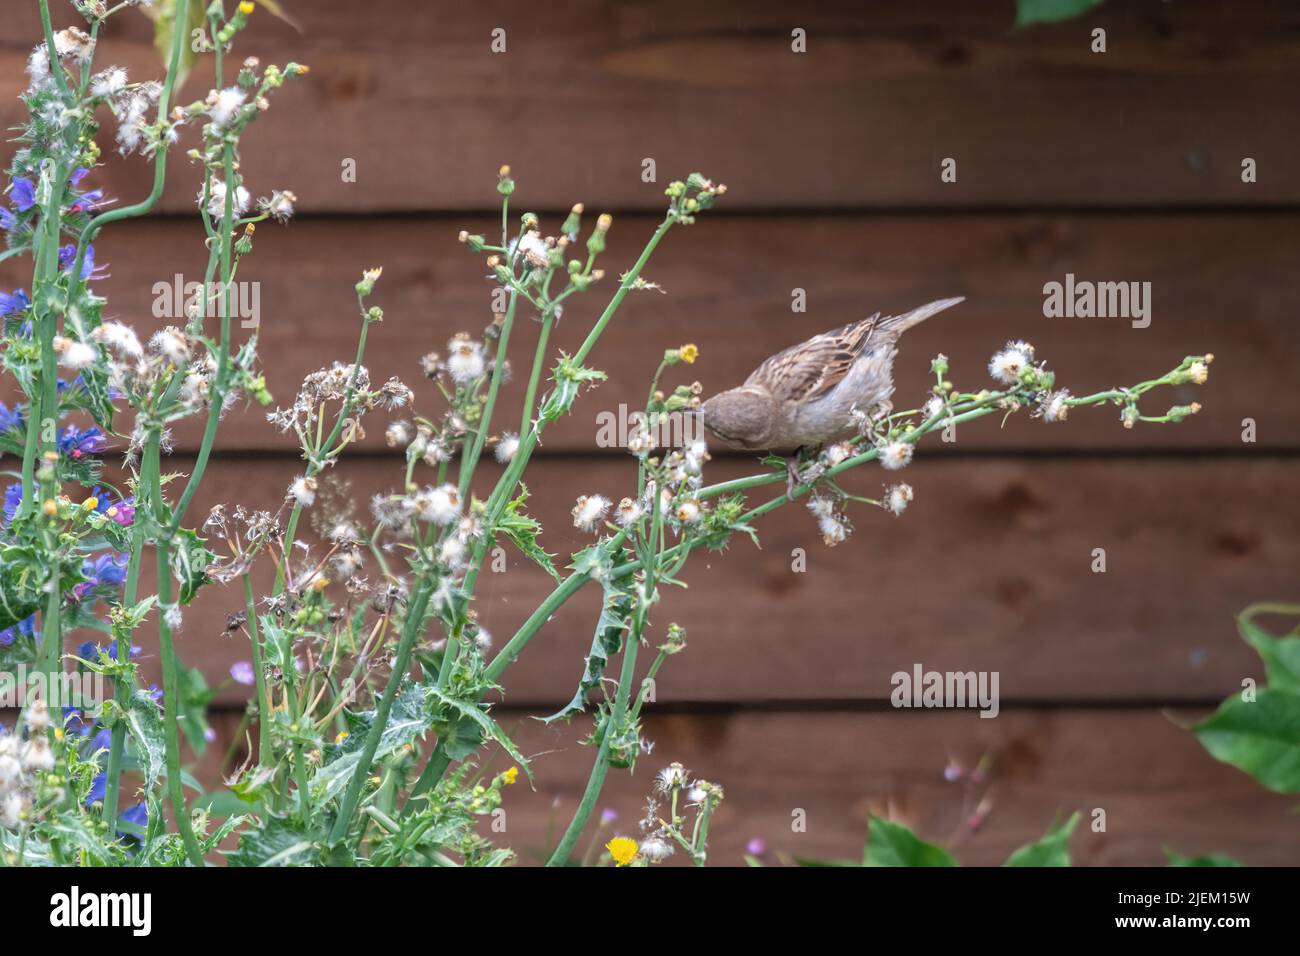 House sparrow (Passer domesticus) feeding on seeds on natural wildflowers or weeds in a wild garden during summer, England, UK Stock Photo